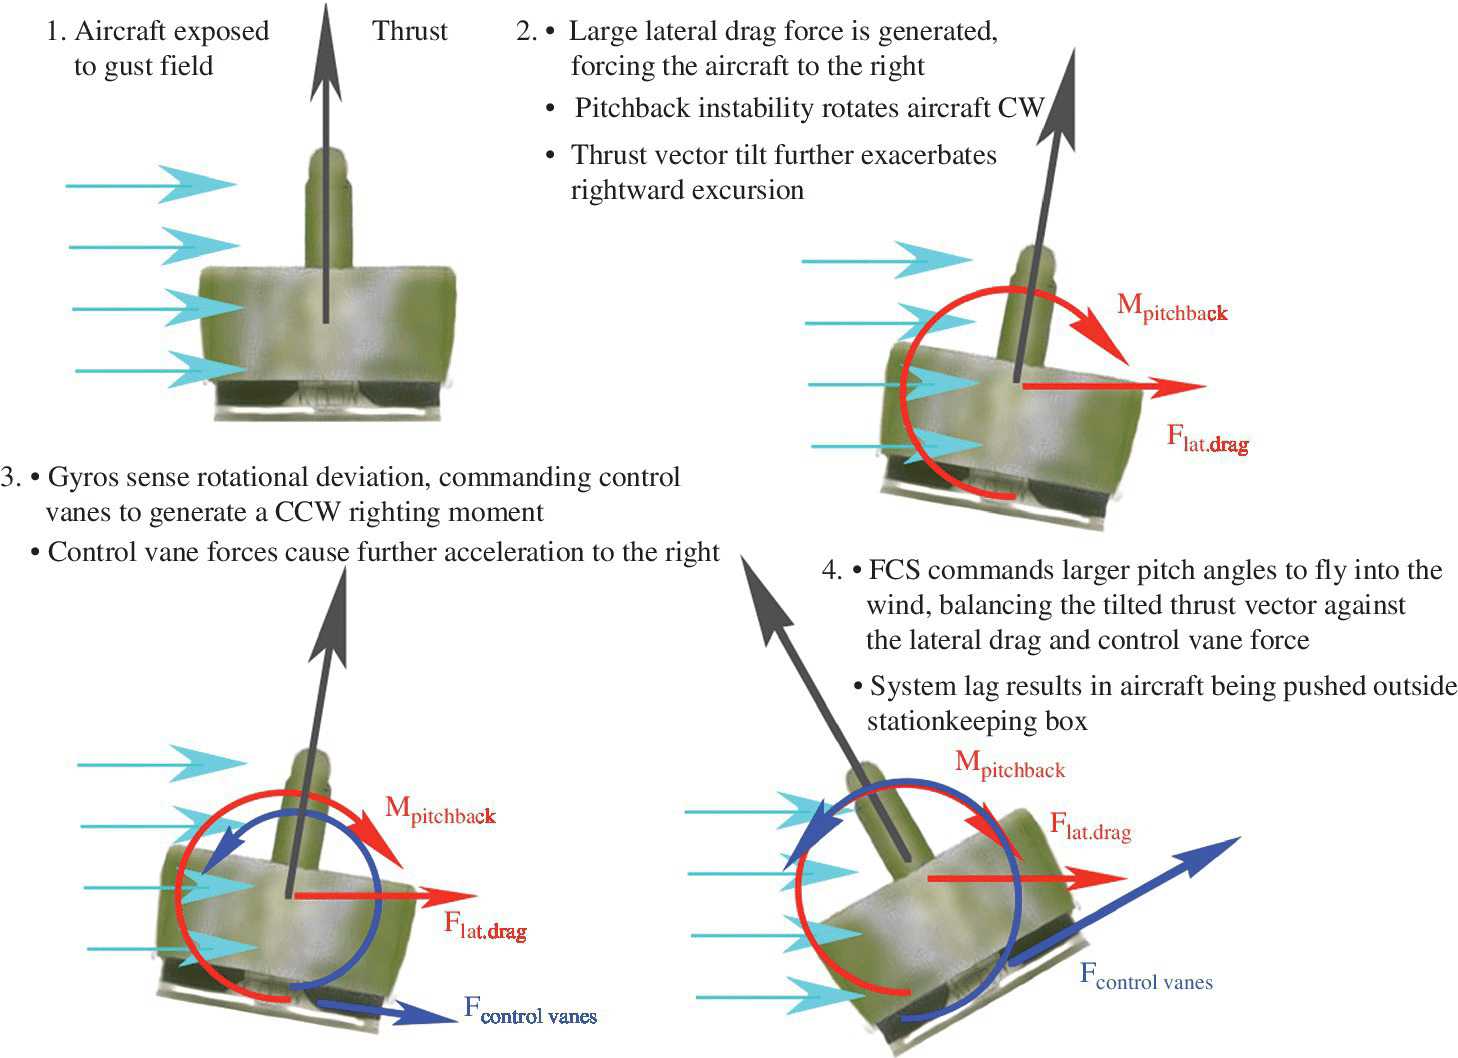 Four schematics of the fundamentals of Coleopter pitchback instability with labels thrust, Mpitchback, Flat.drag, and Fcontrol vanes, respectively.